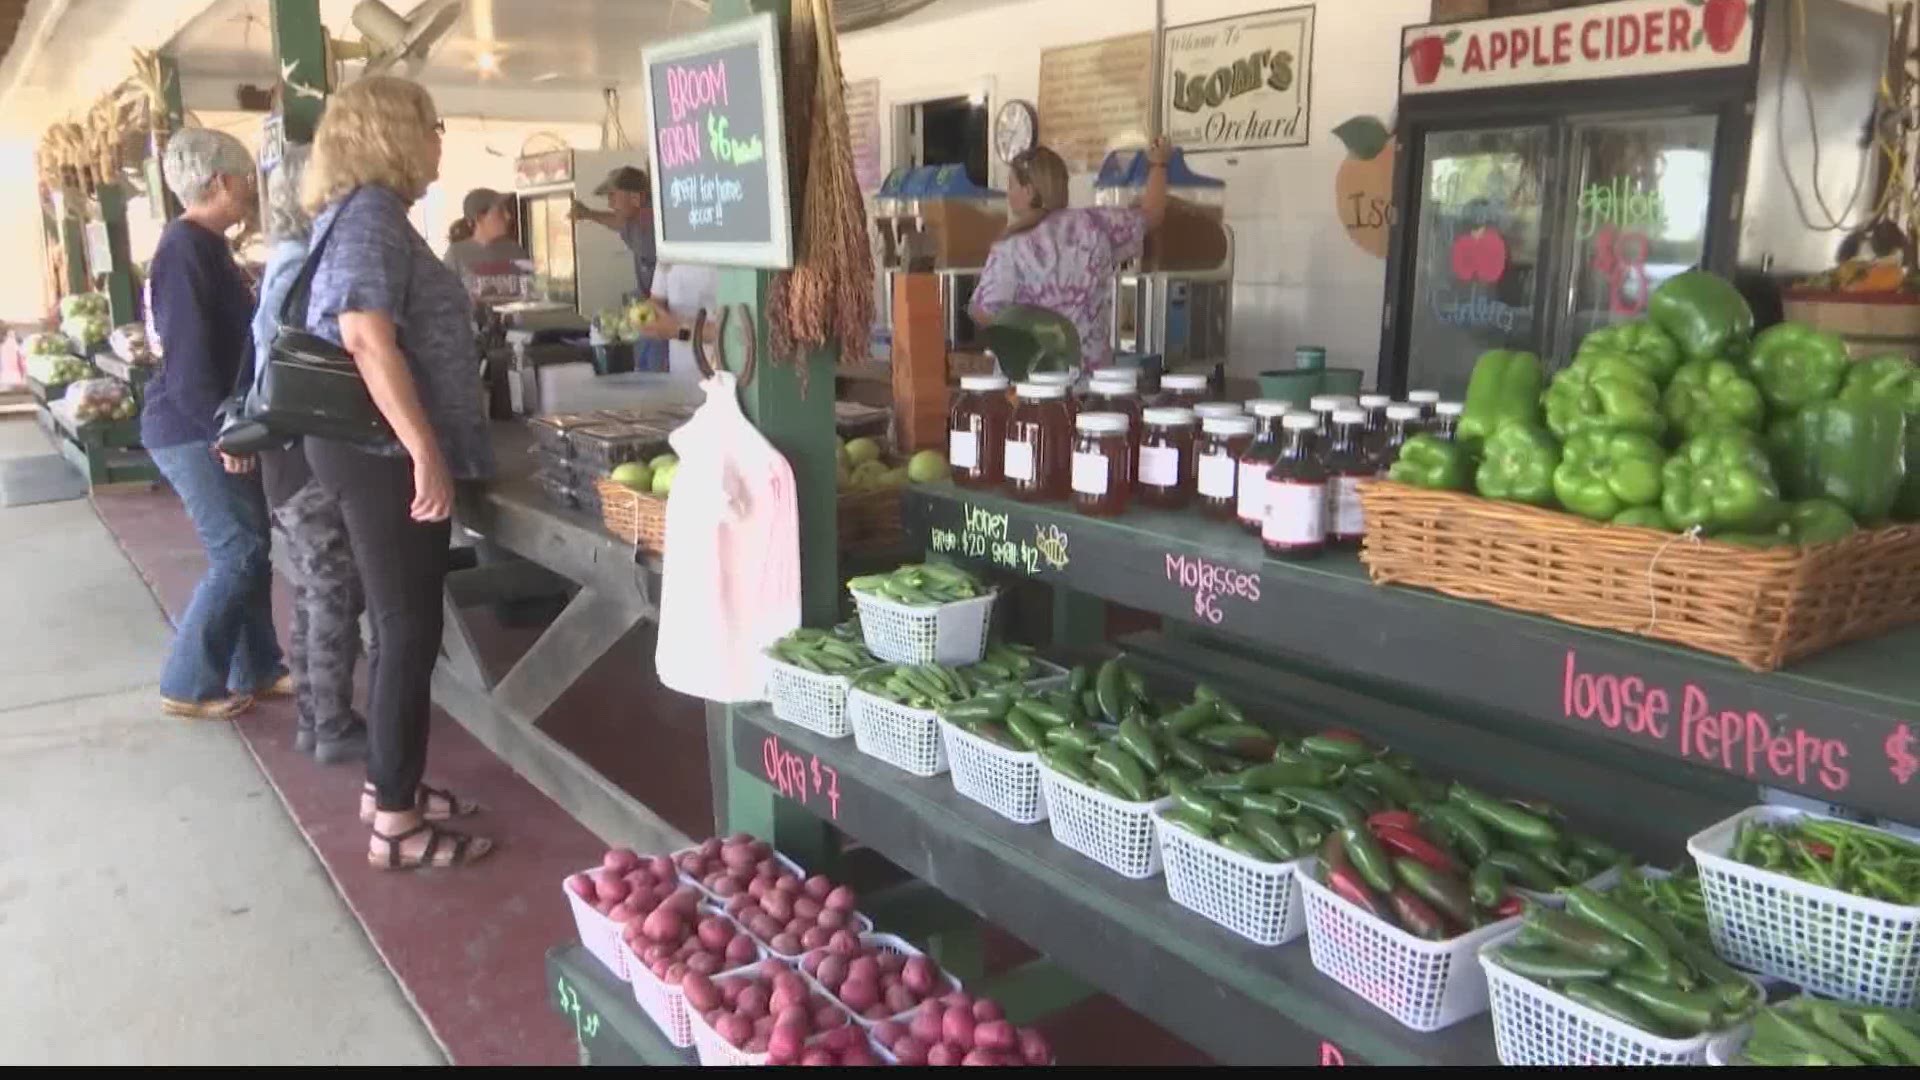 Madison City Farmers Market is asking only one person per household come out to shop.